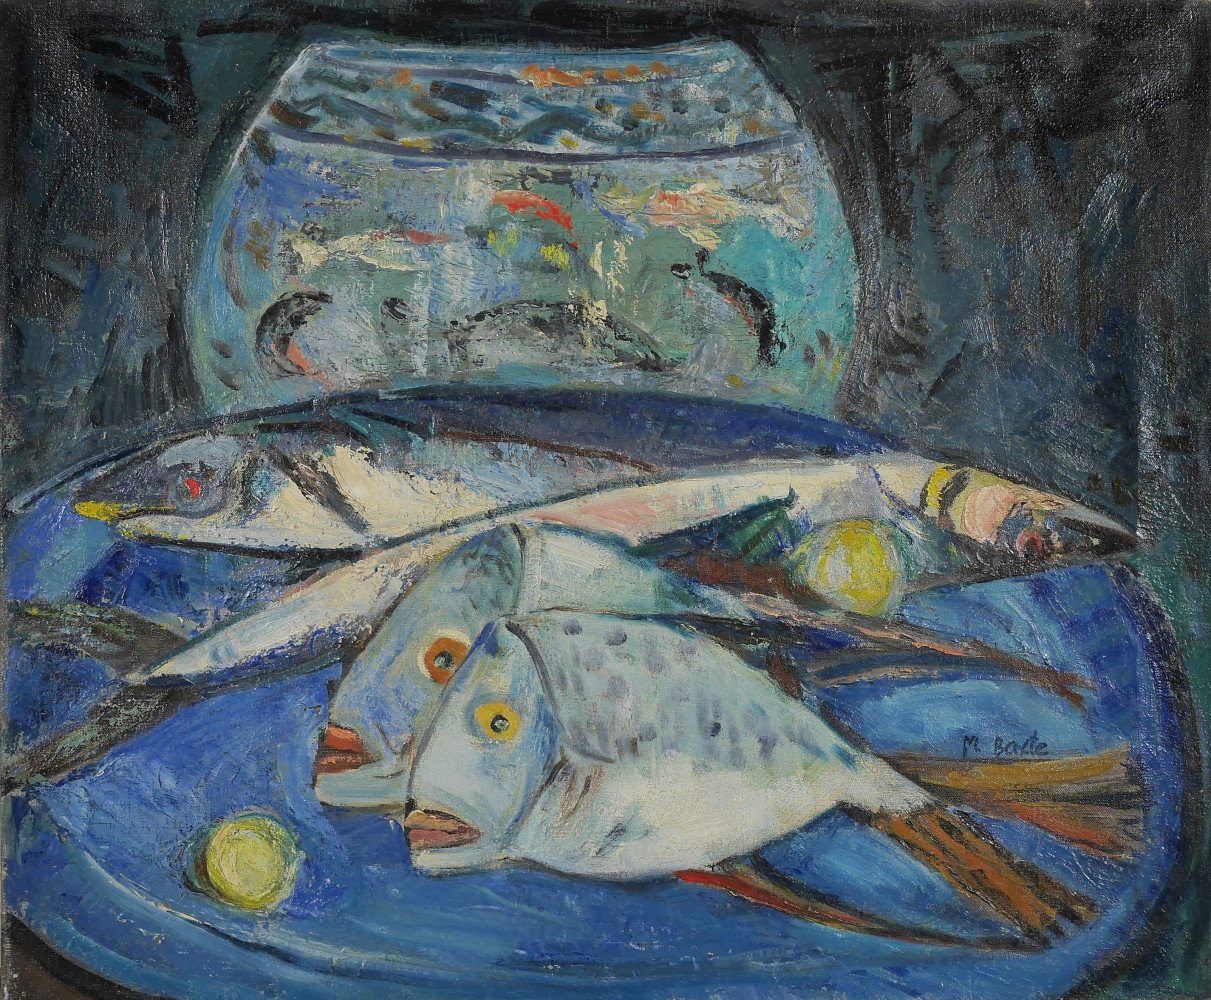 Still Life with Fish #278 by Michael Baxte